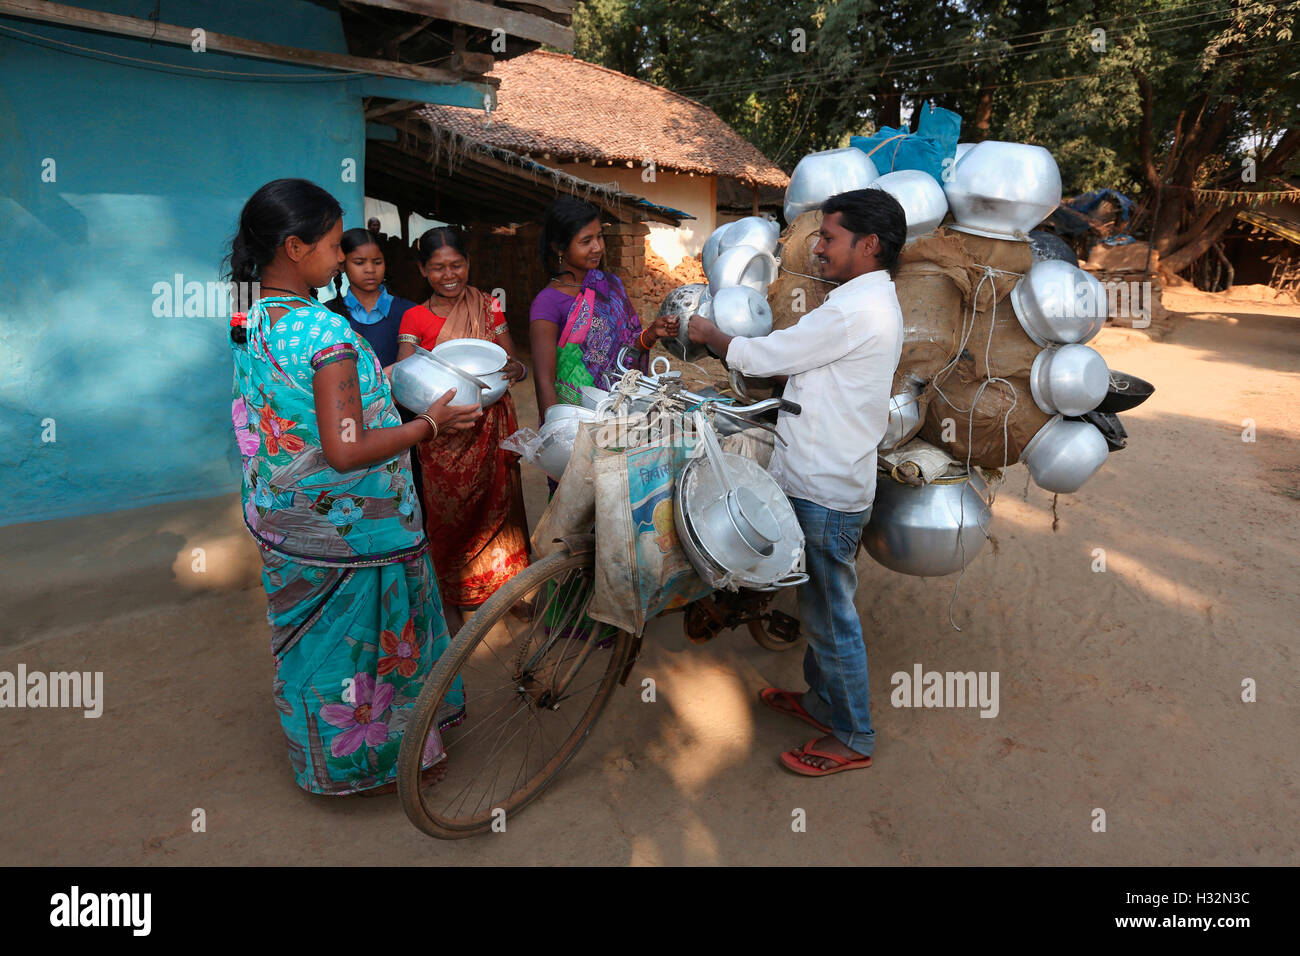 Woman buying utensils from a vendor, BHATRA TRIBE, Ulnar Vilage, Chattisgadh, India Stock Photo